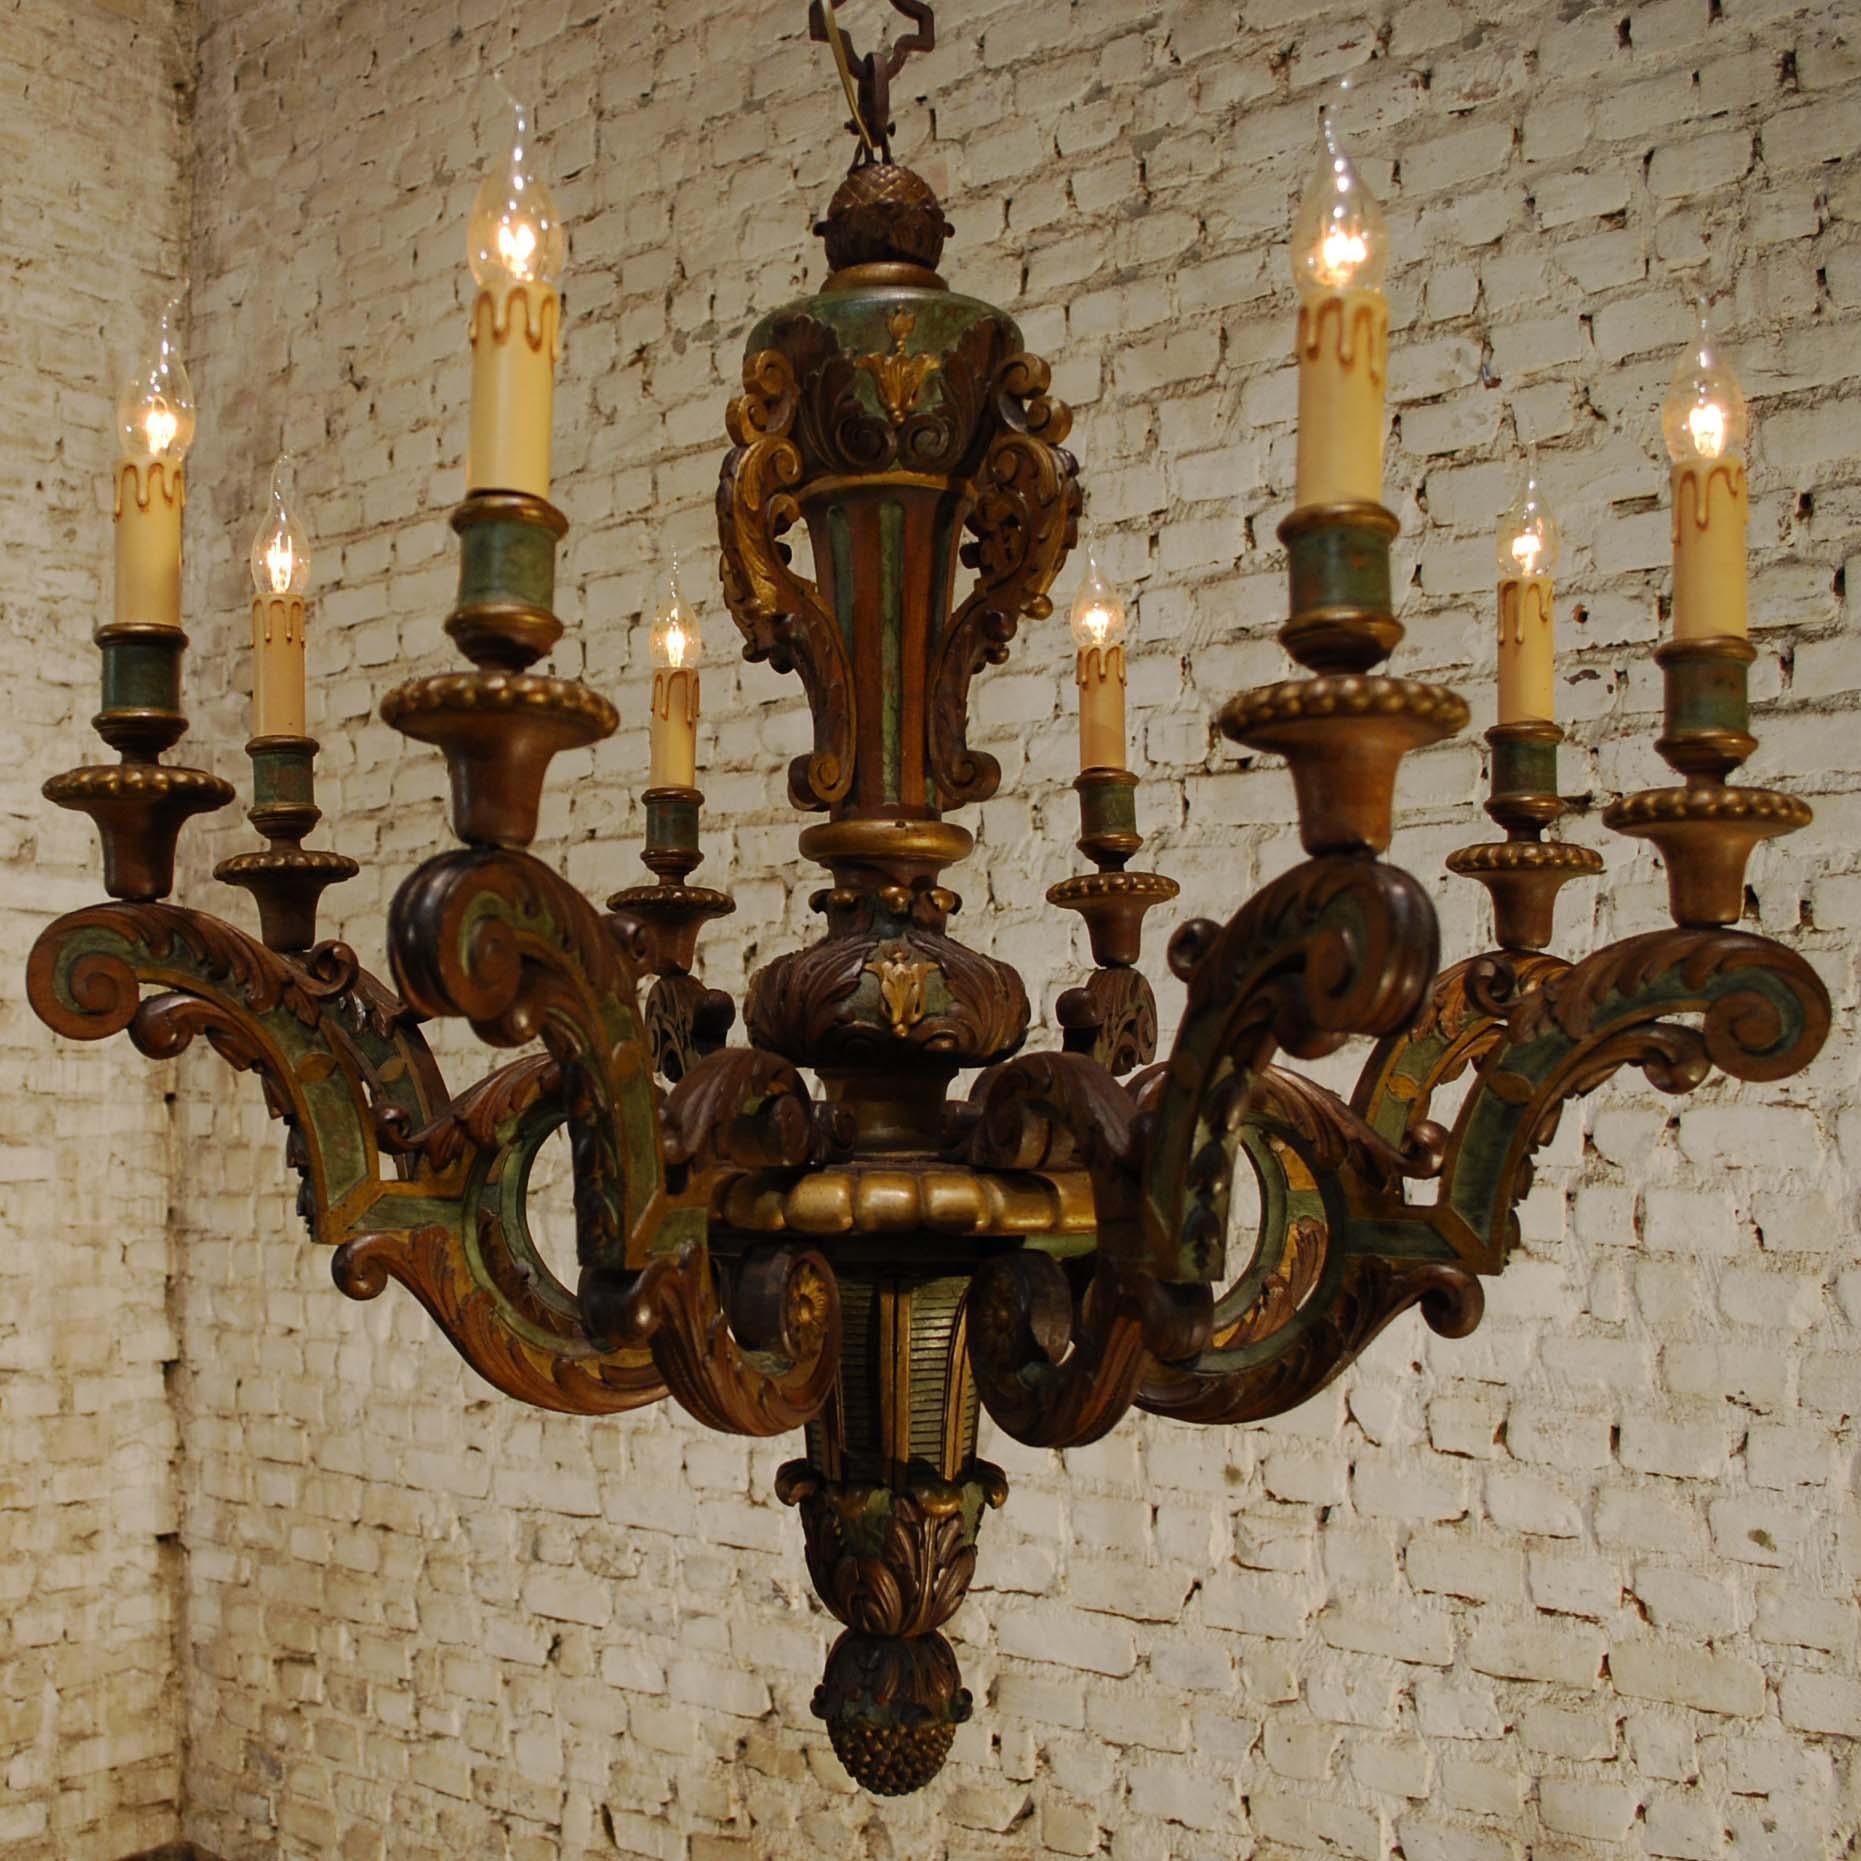 This elegant antique polychrome carved wood chandelier was made in Italy during the late 1800s. It is hand-carved in solid walnut and beechwood. Carved scrolls and a acanthus leaves adorn the body and arms. Together with the polychrome this is a